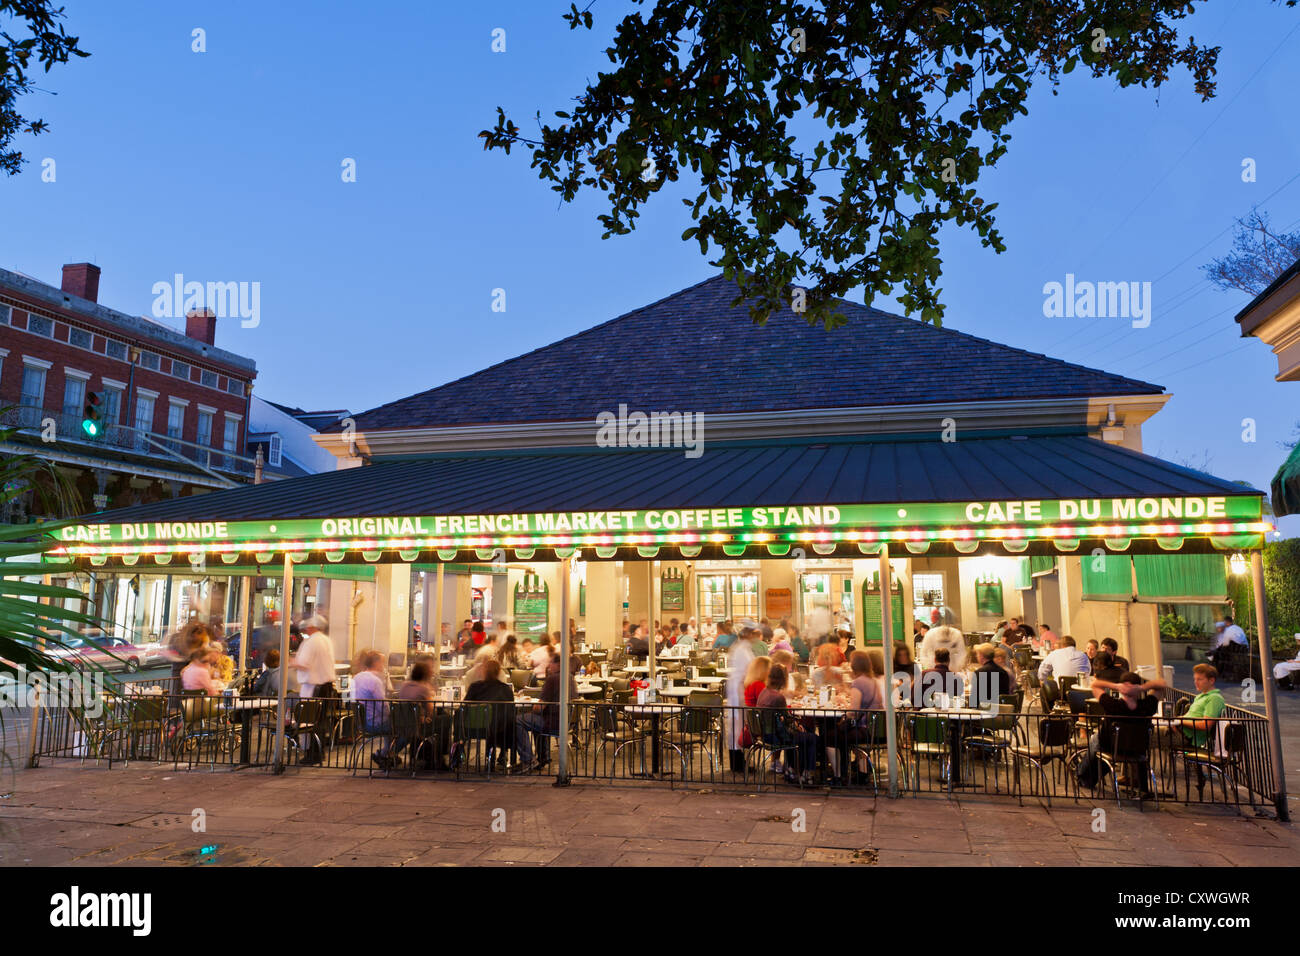 Cafe Du Monde, French Market Coffee stand, French Quarter, New Orleans, Louisiana Stockfoto